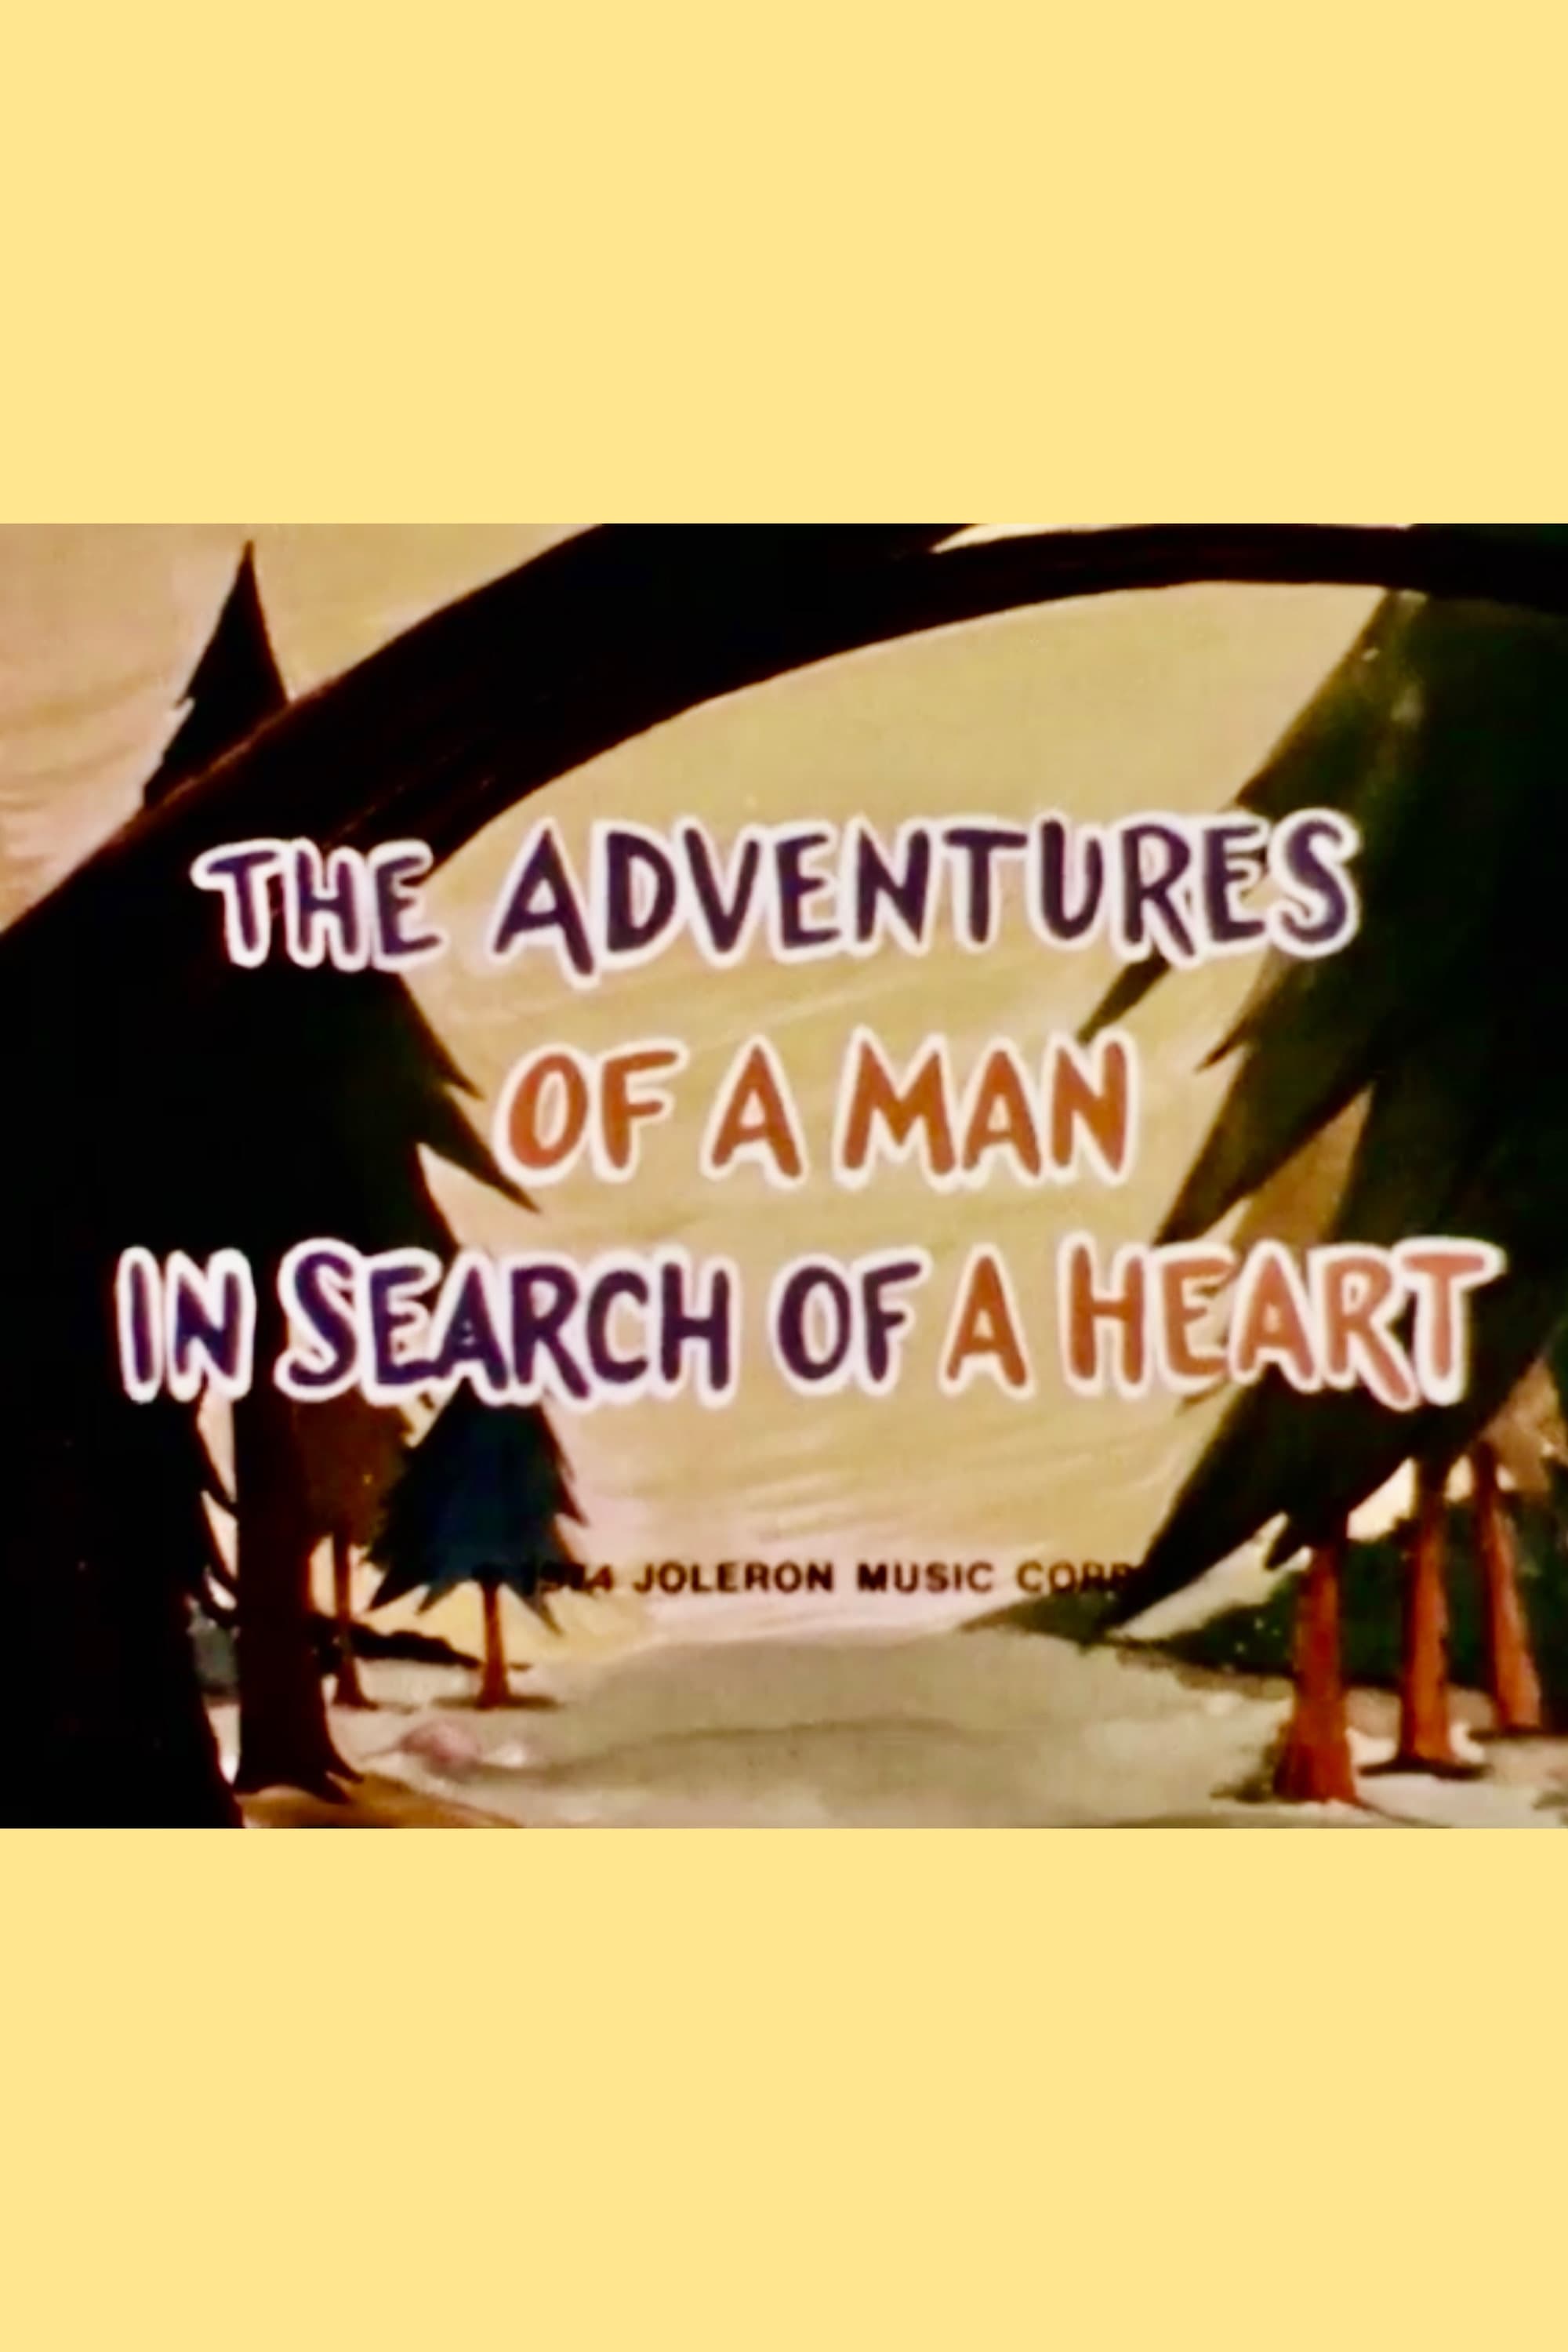 The Adventures of a Man in Search of a Heart